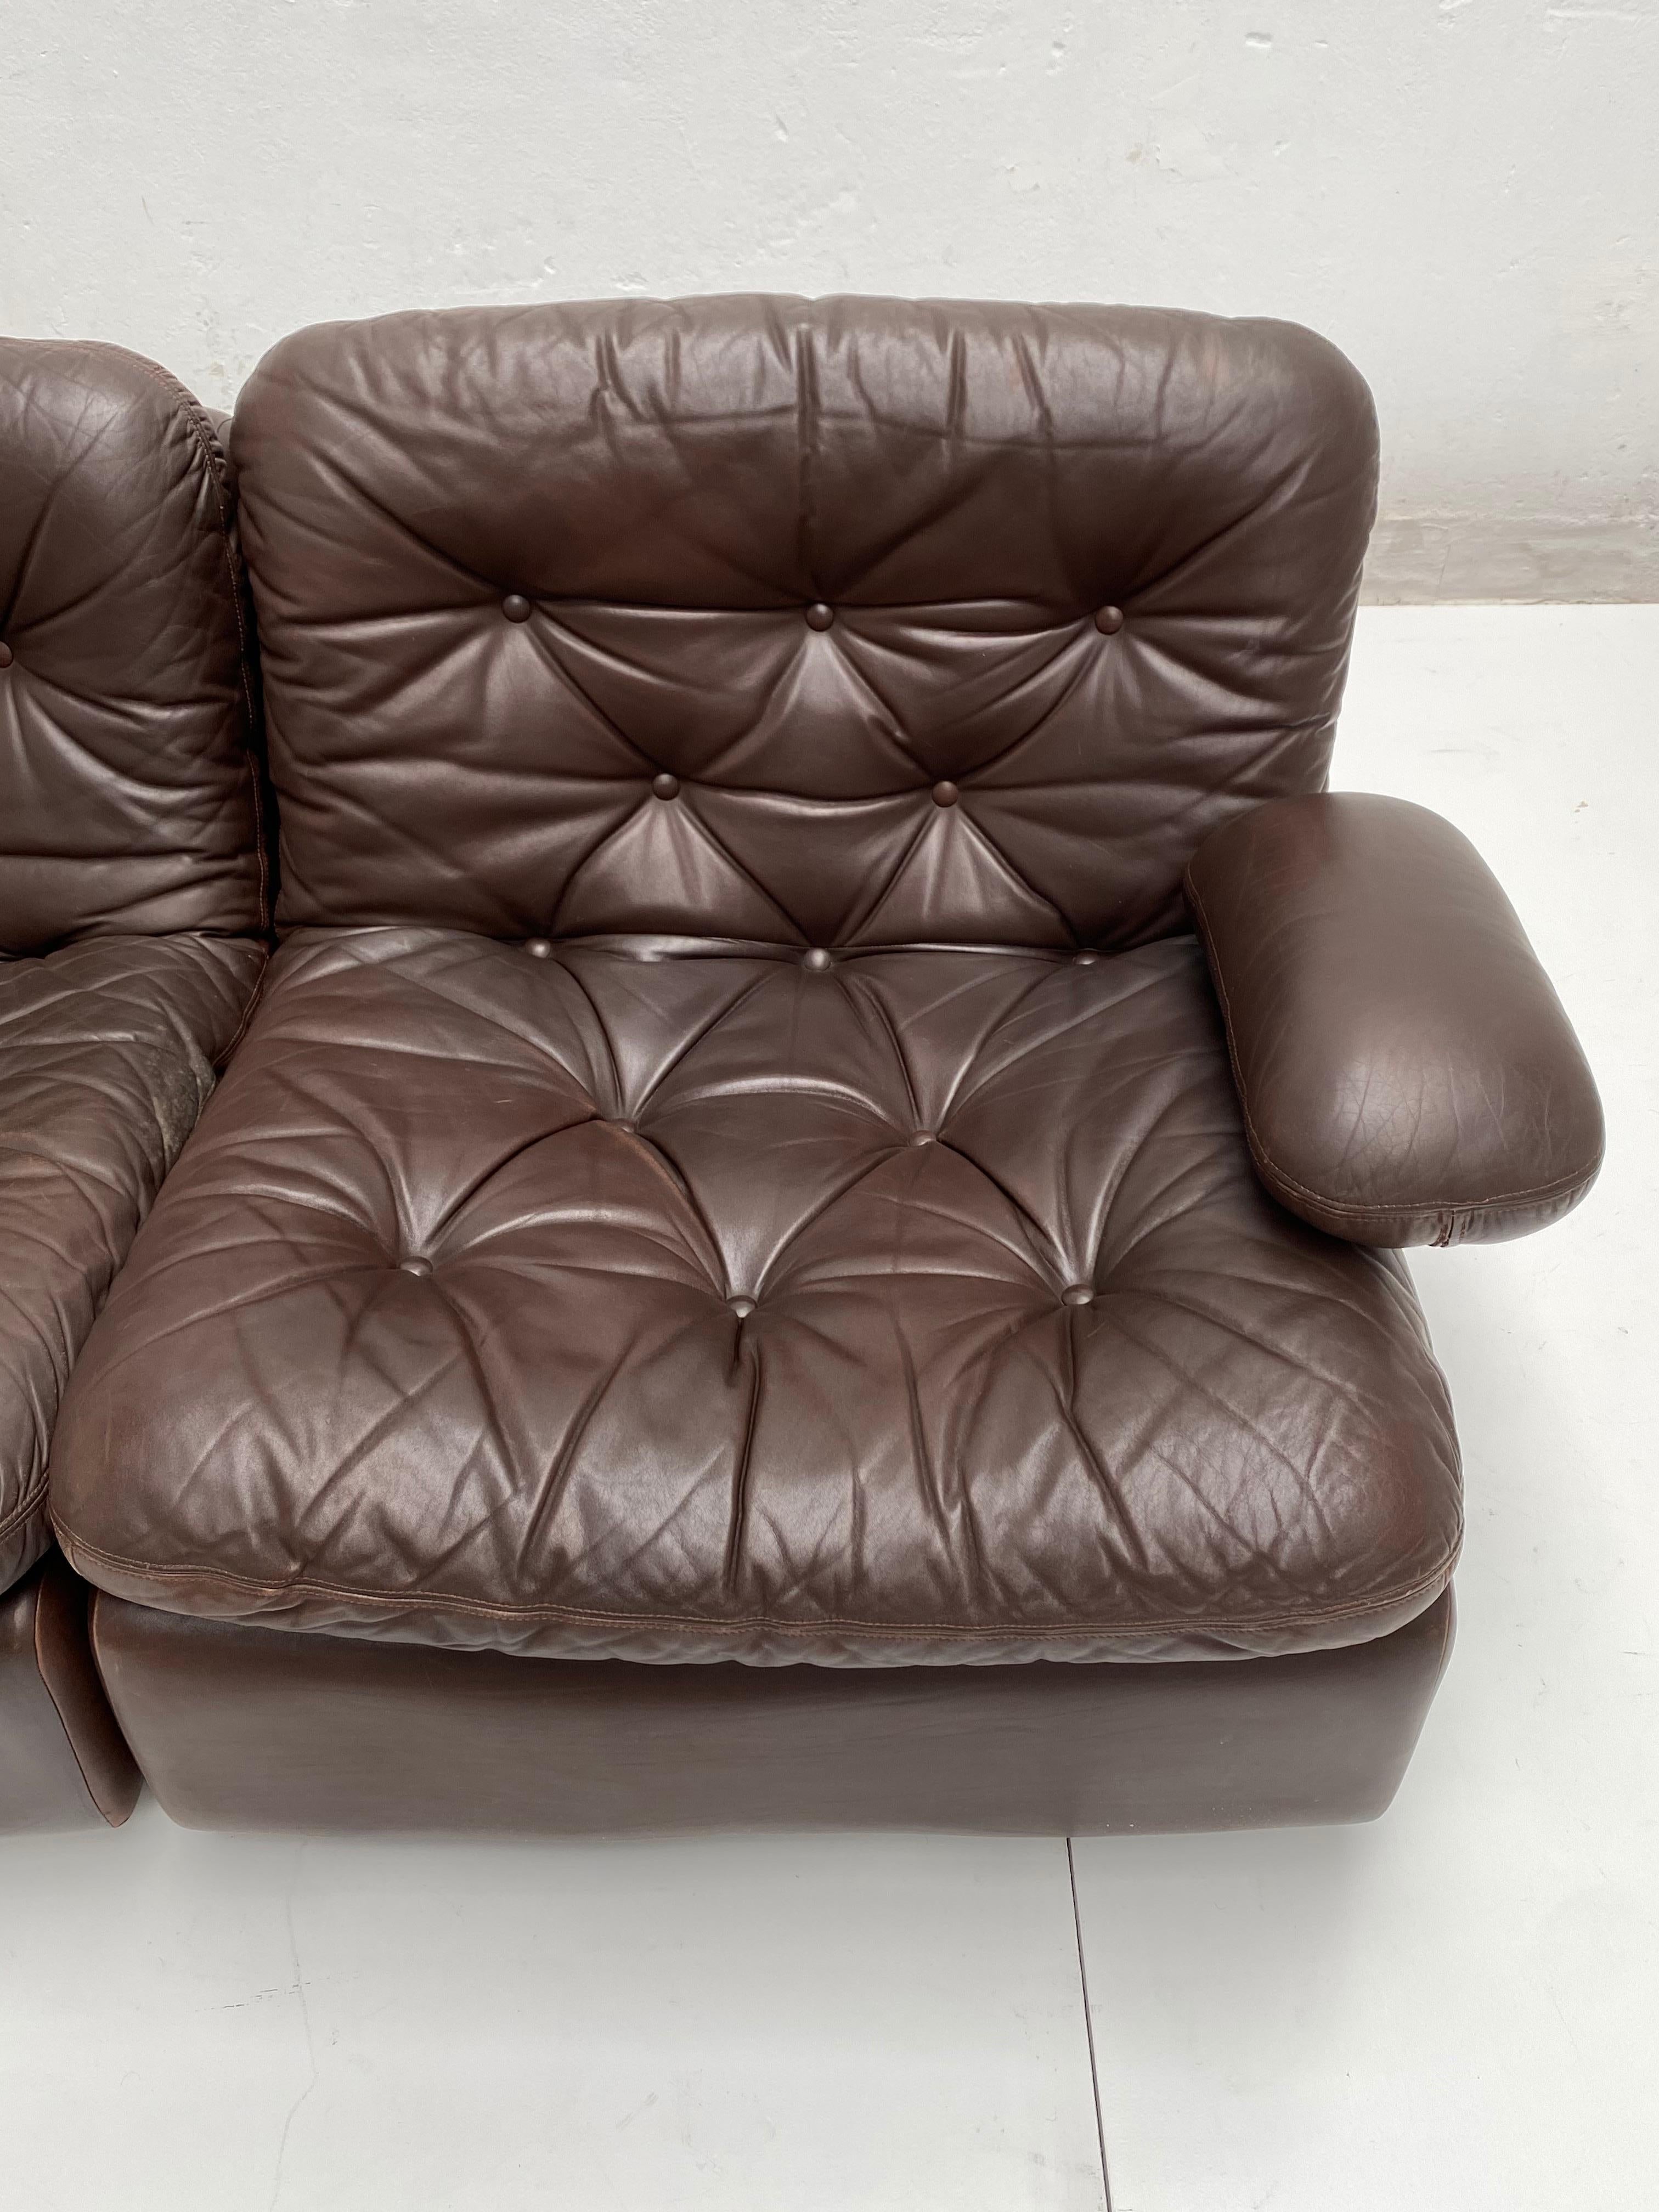 Chocolate Brown Leather 5-Piece Modular Seating System, COR Germany, 1970s 4